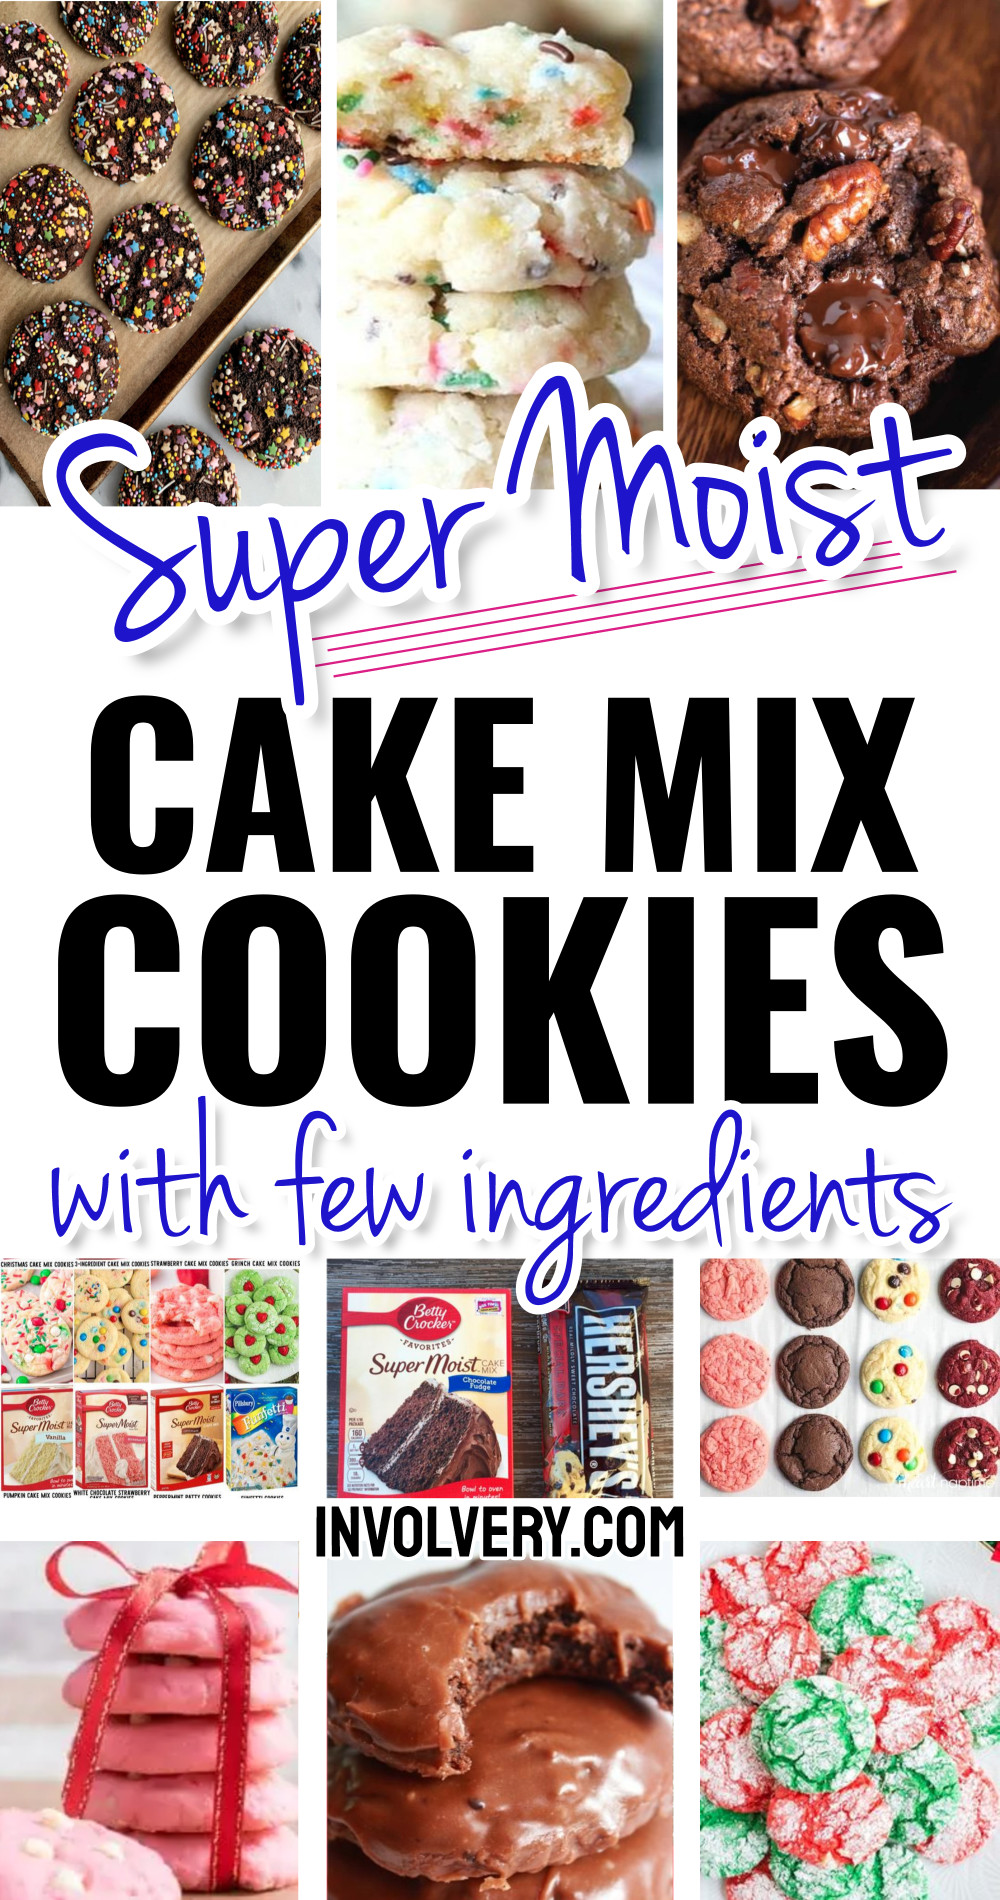 Super Moist Cake Mix Cookies With Few ingredients